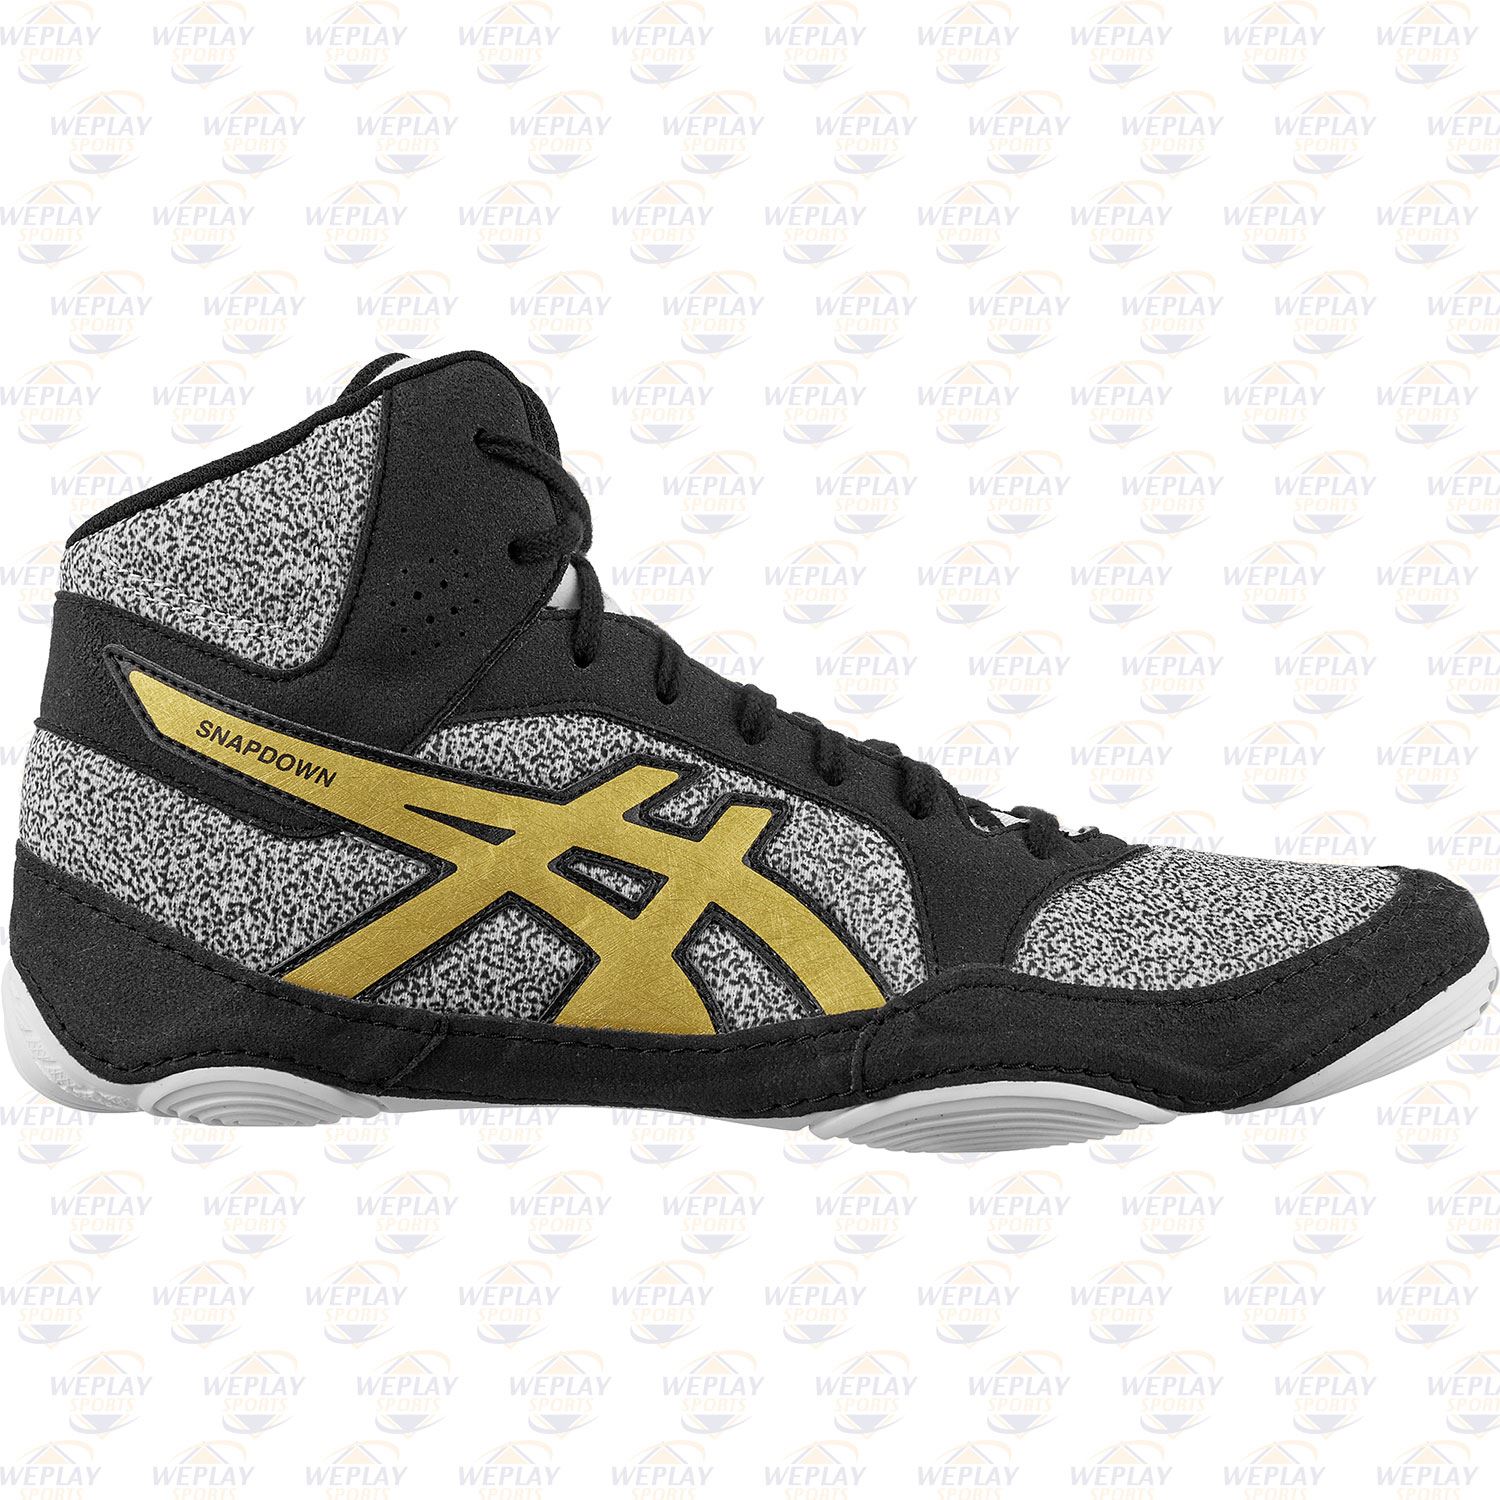 asics snapdown 2 wrestling shoes